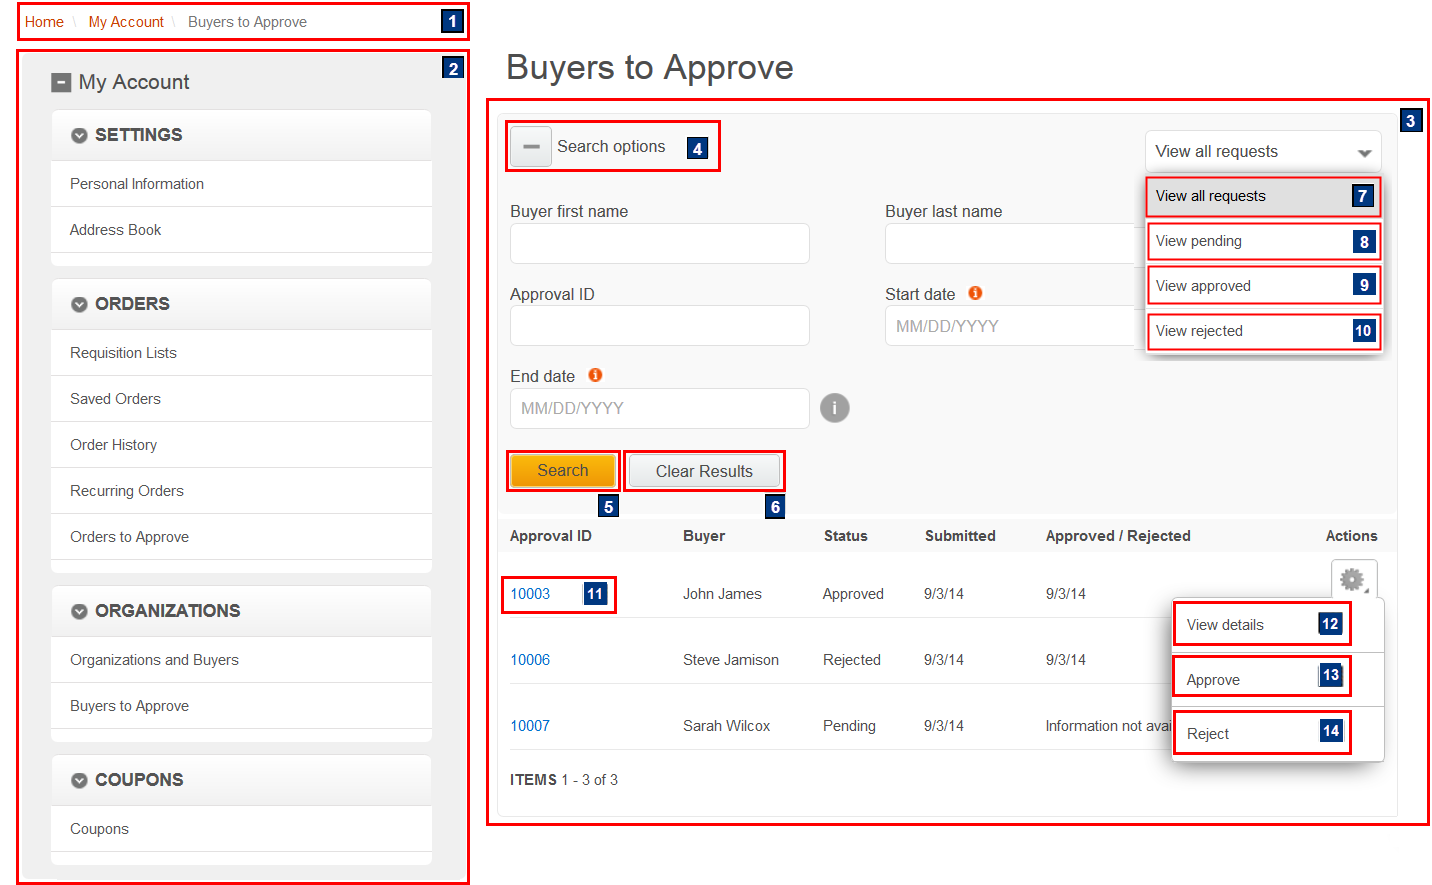 Buyers to Approve page screen capture